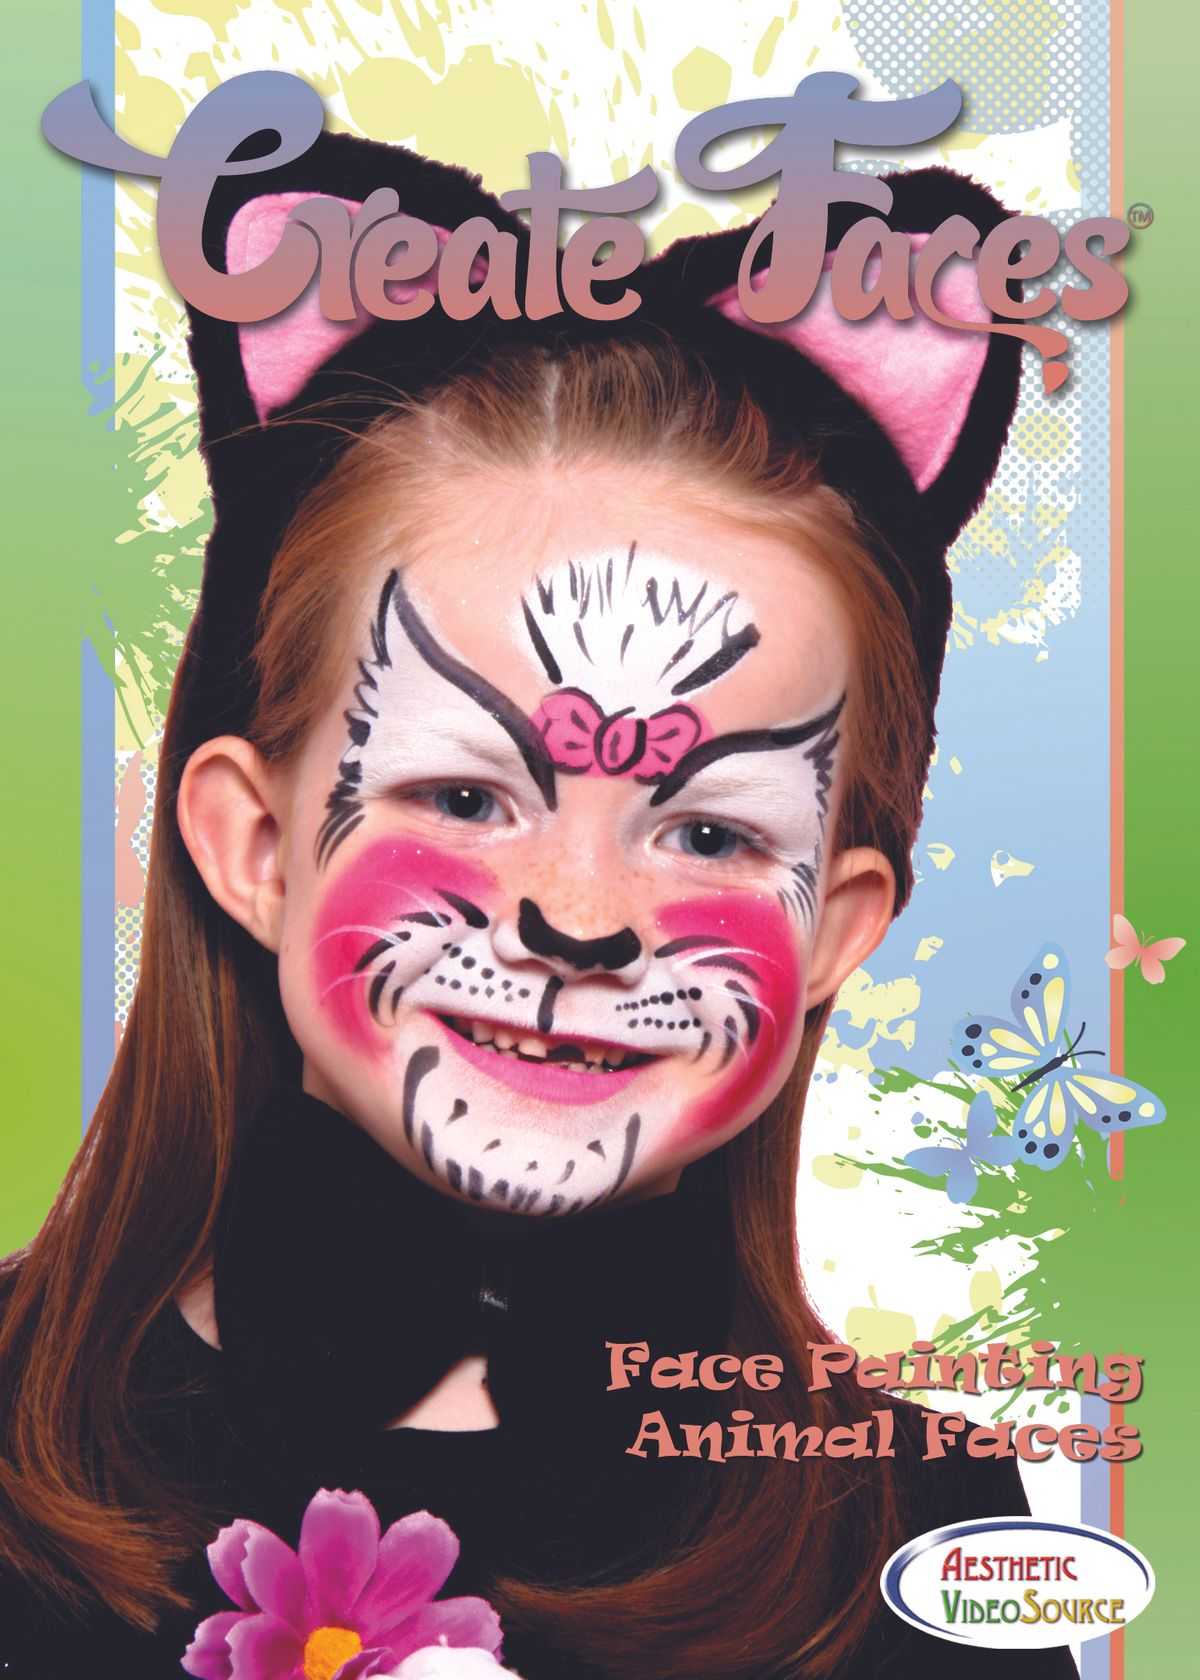 Create Faces Face Painting: Animal Faces - Aesthetic VideoSource